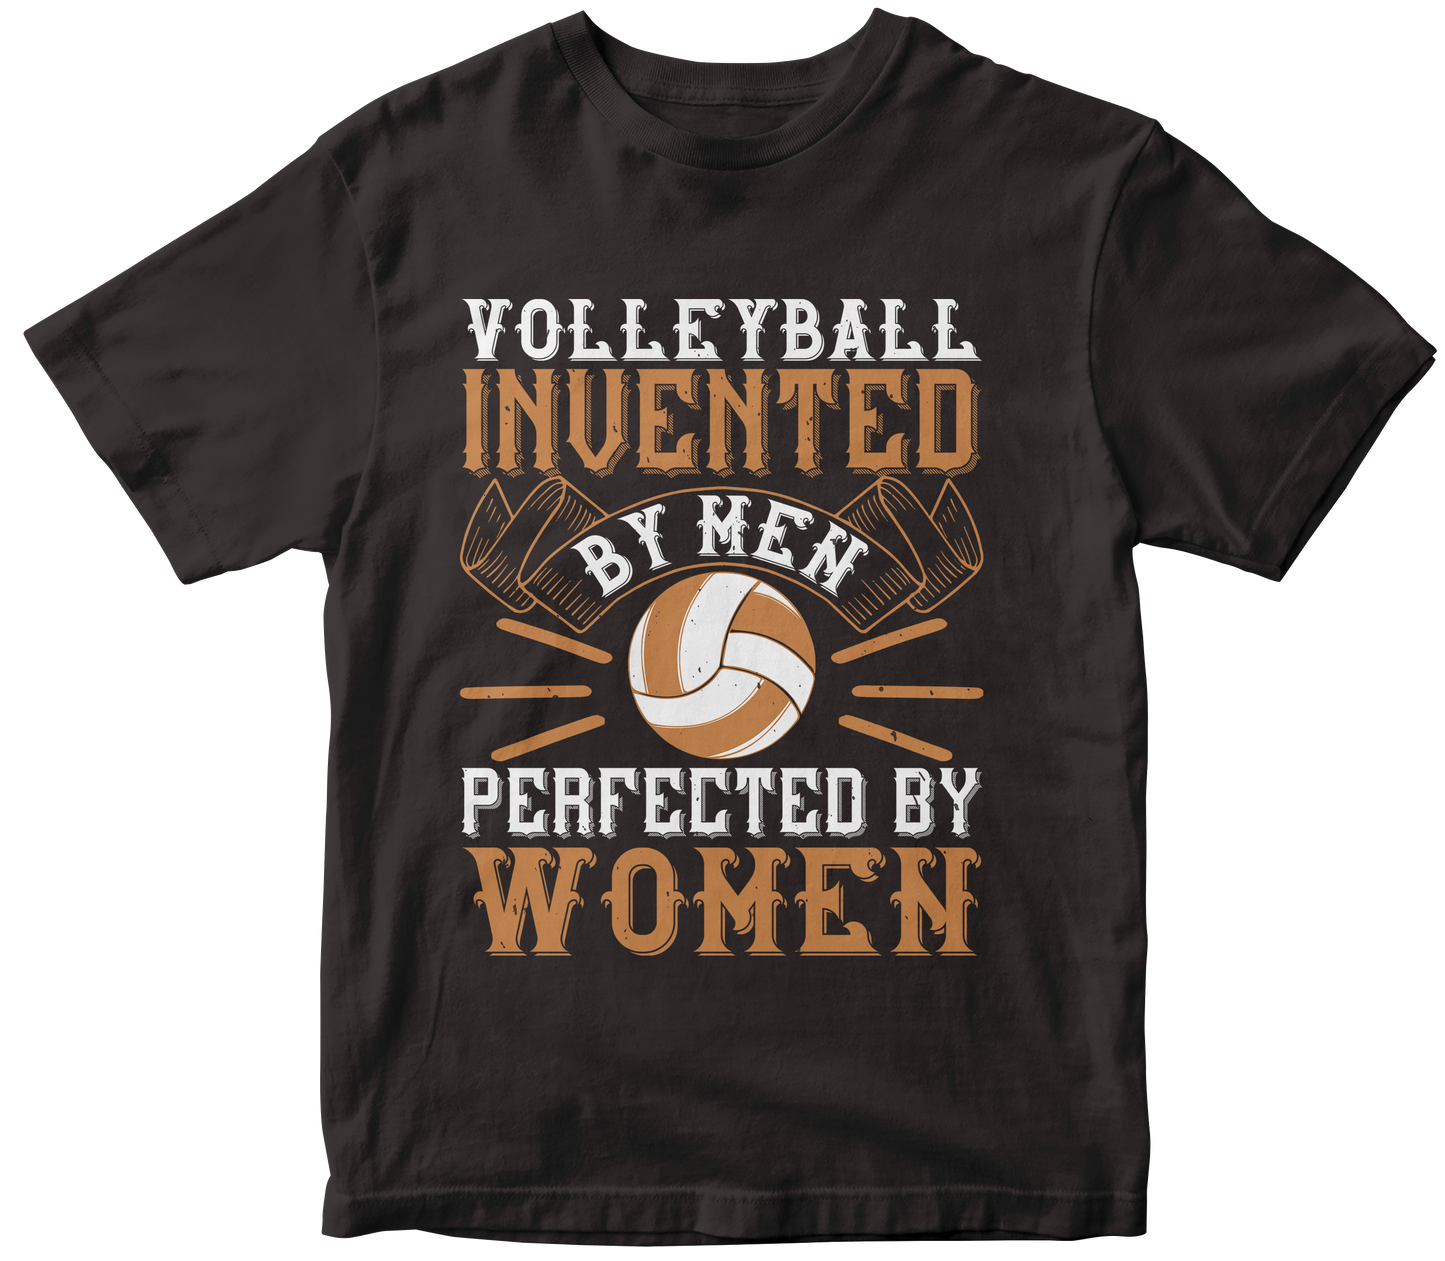 VOLLEYBALL INVENTED BY MEN PERFECTED BY WOMEN